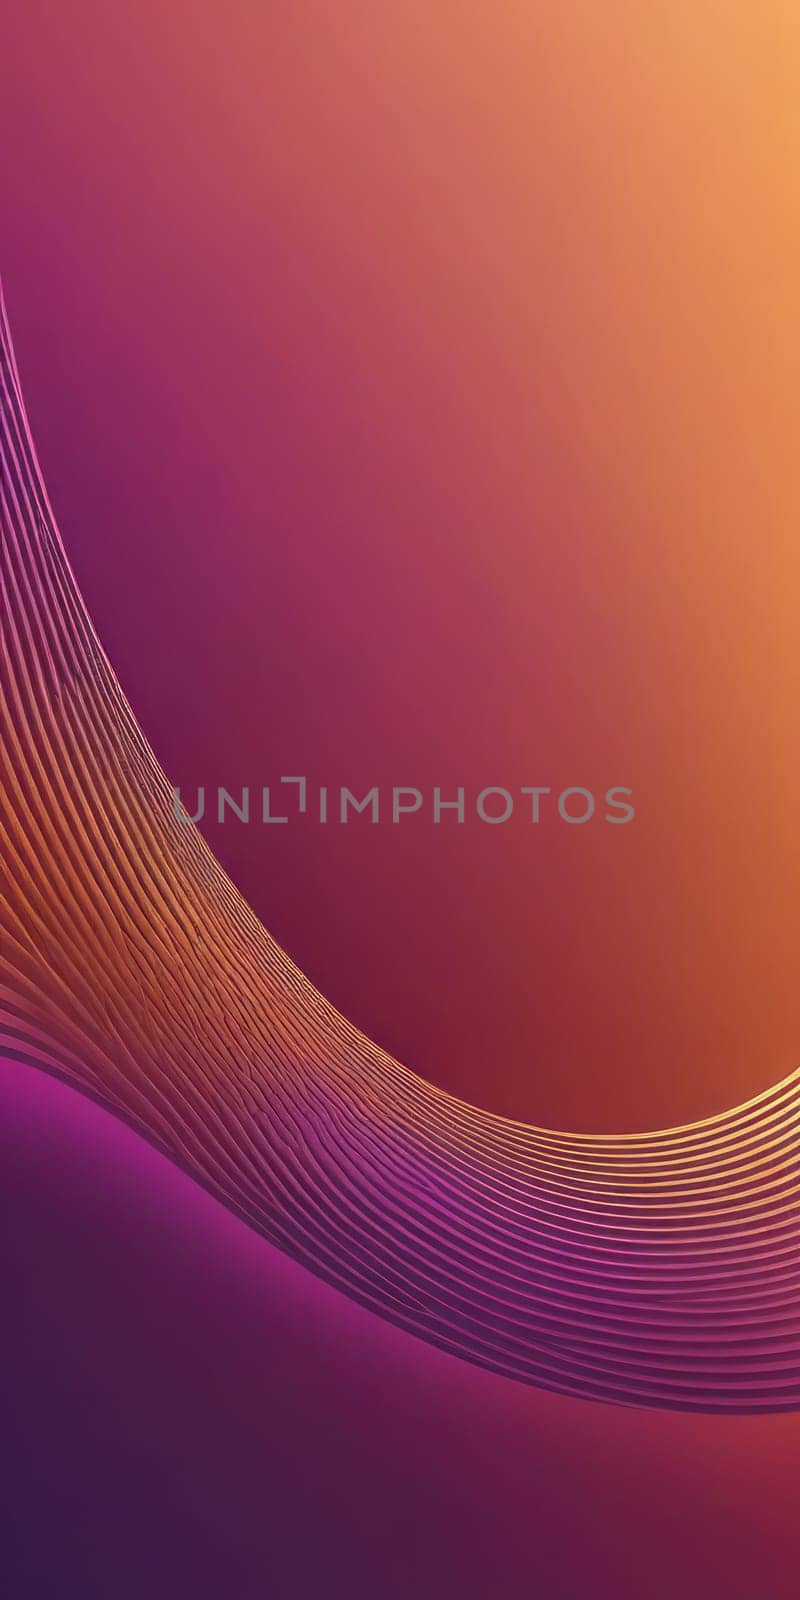 Parabolic Shapes in Purple and Brown by nkotlyar